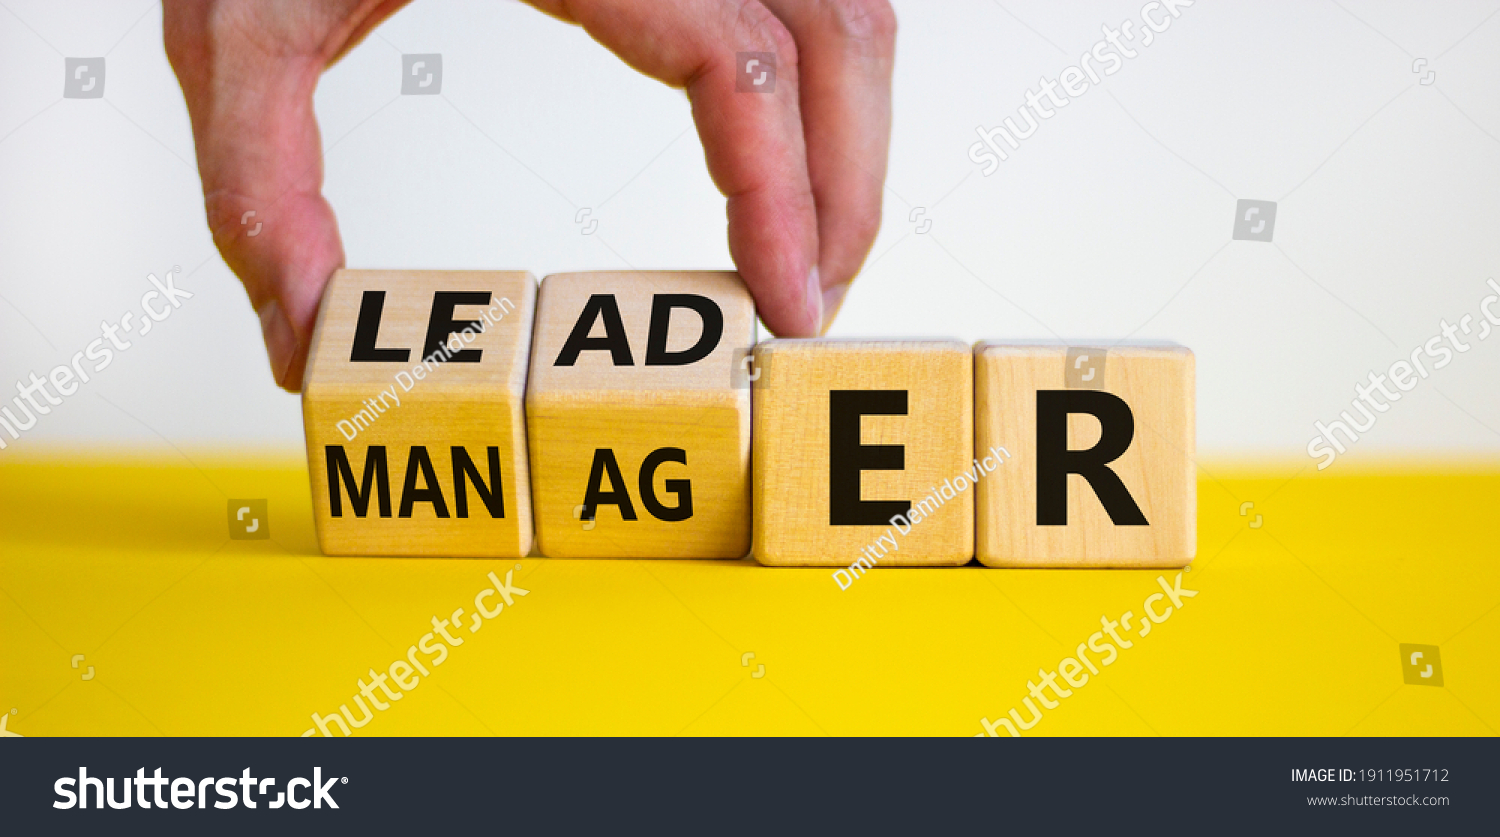 Manager versus leader symbol. Businessman flips wooden cubes and changes the word 'manager' to 'leader'. Beautiful white background, copy space. Business and manager versus leader concept. #1911951712